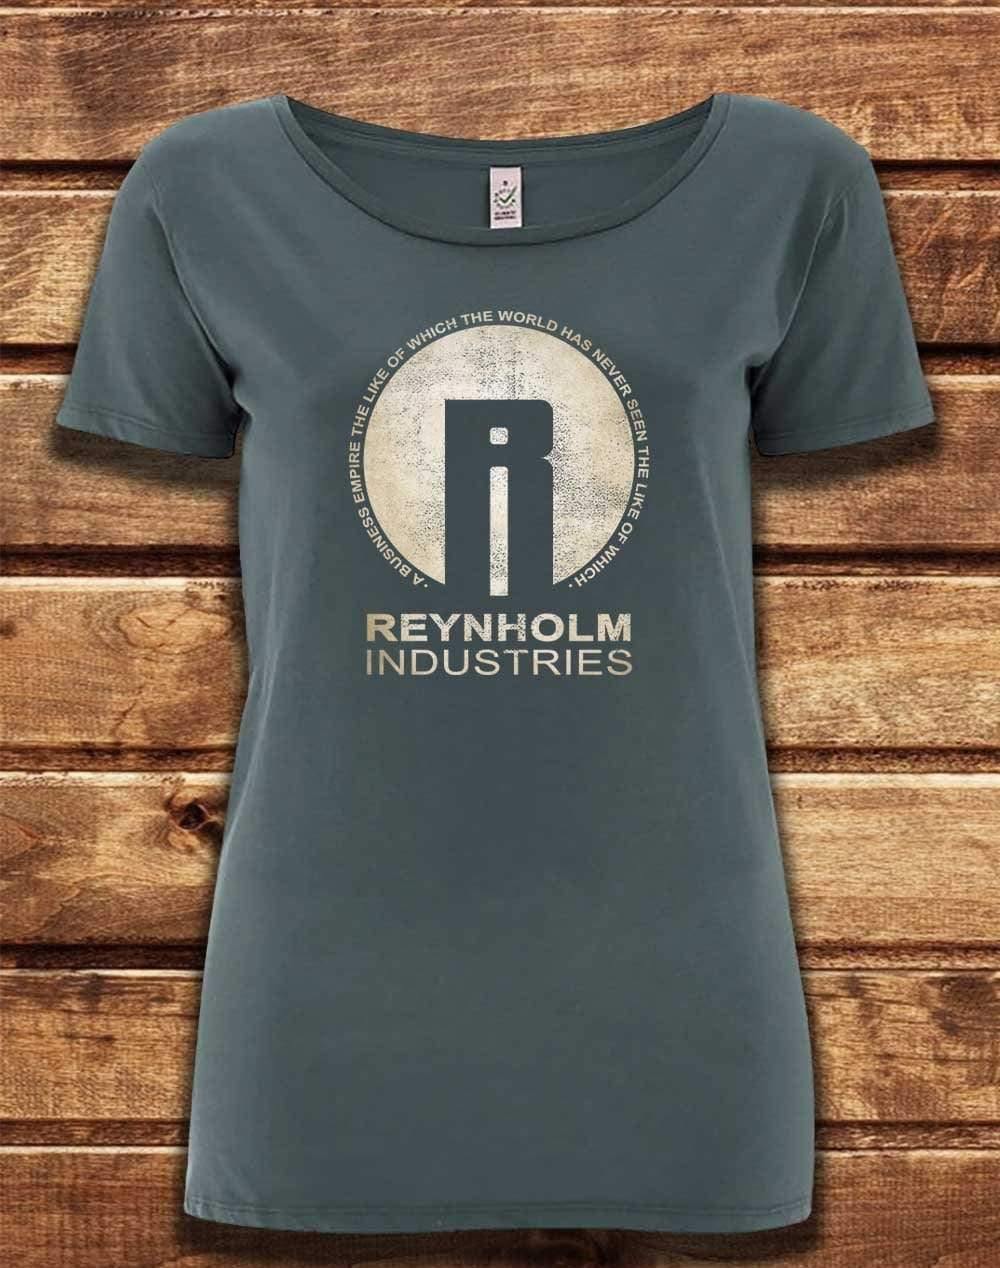 DELUXE Reynholm Industries Organic Scoop Neck T-Shirt 8-10 / Light Charcoal  - Off World Tees